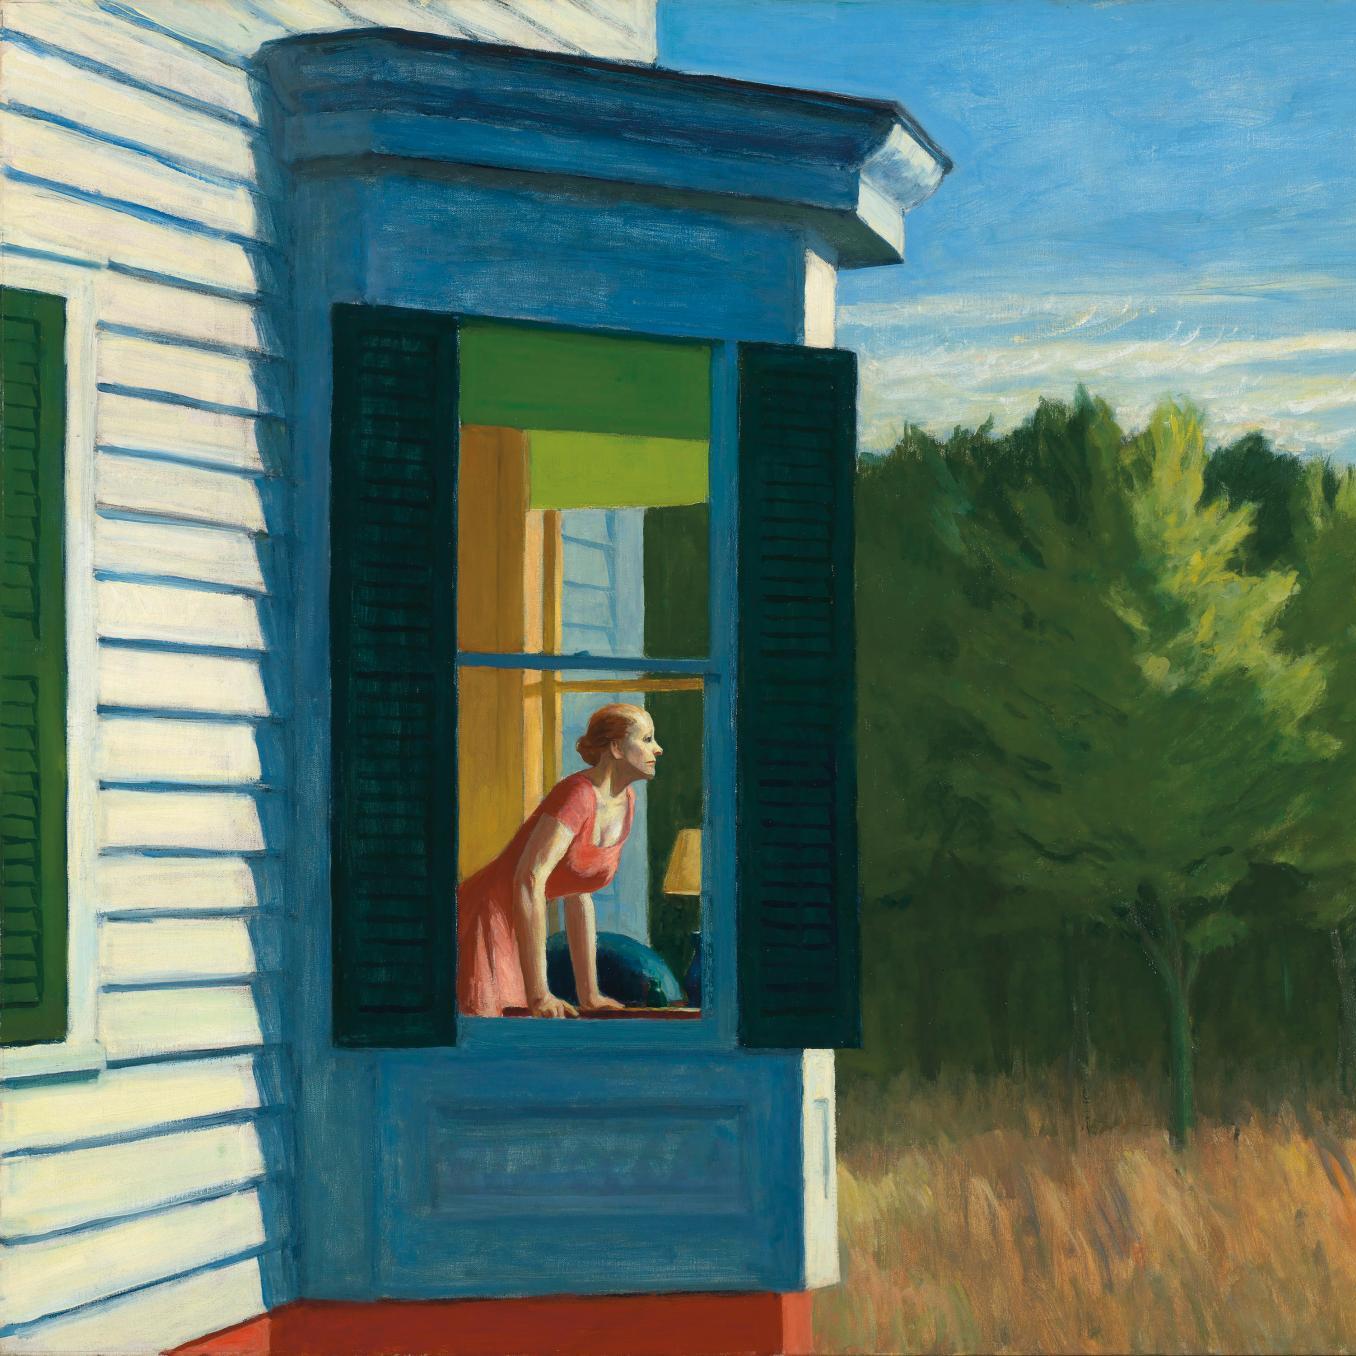 Hopper’s Mystery Replayed in Basel - Exhibitions